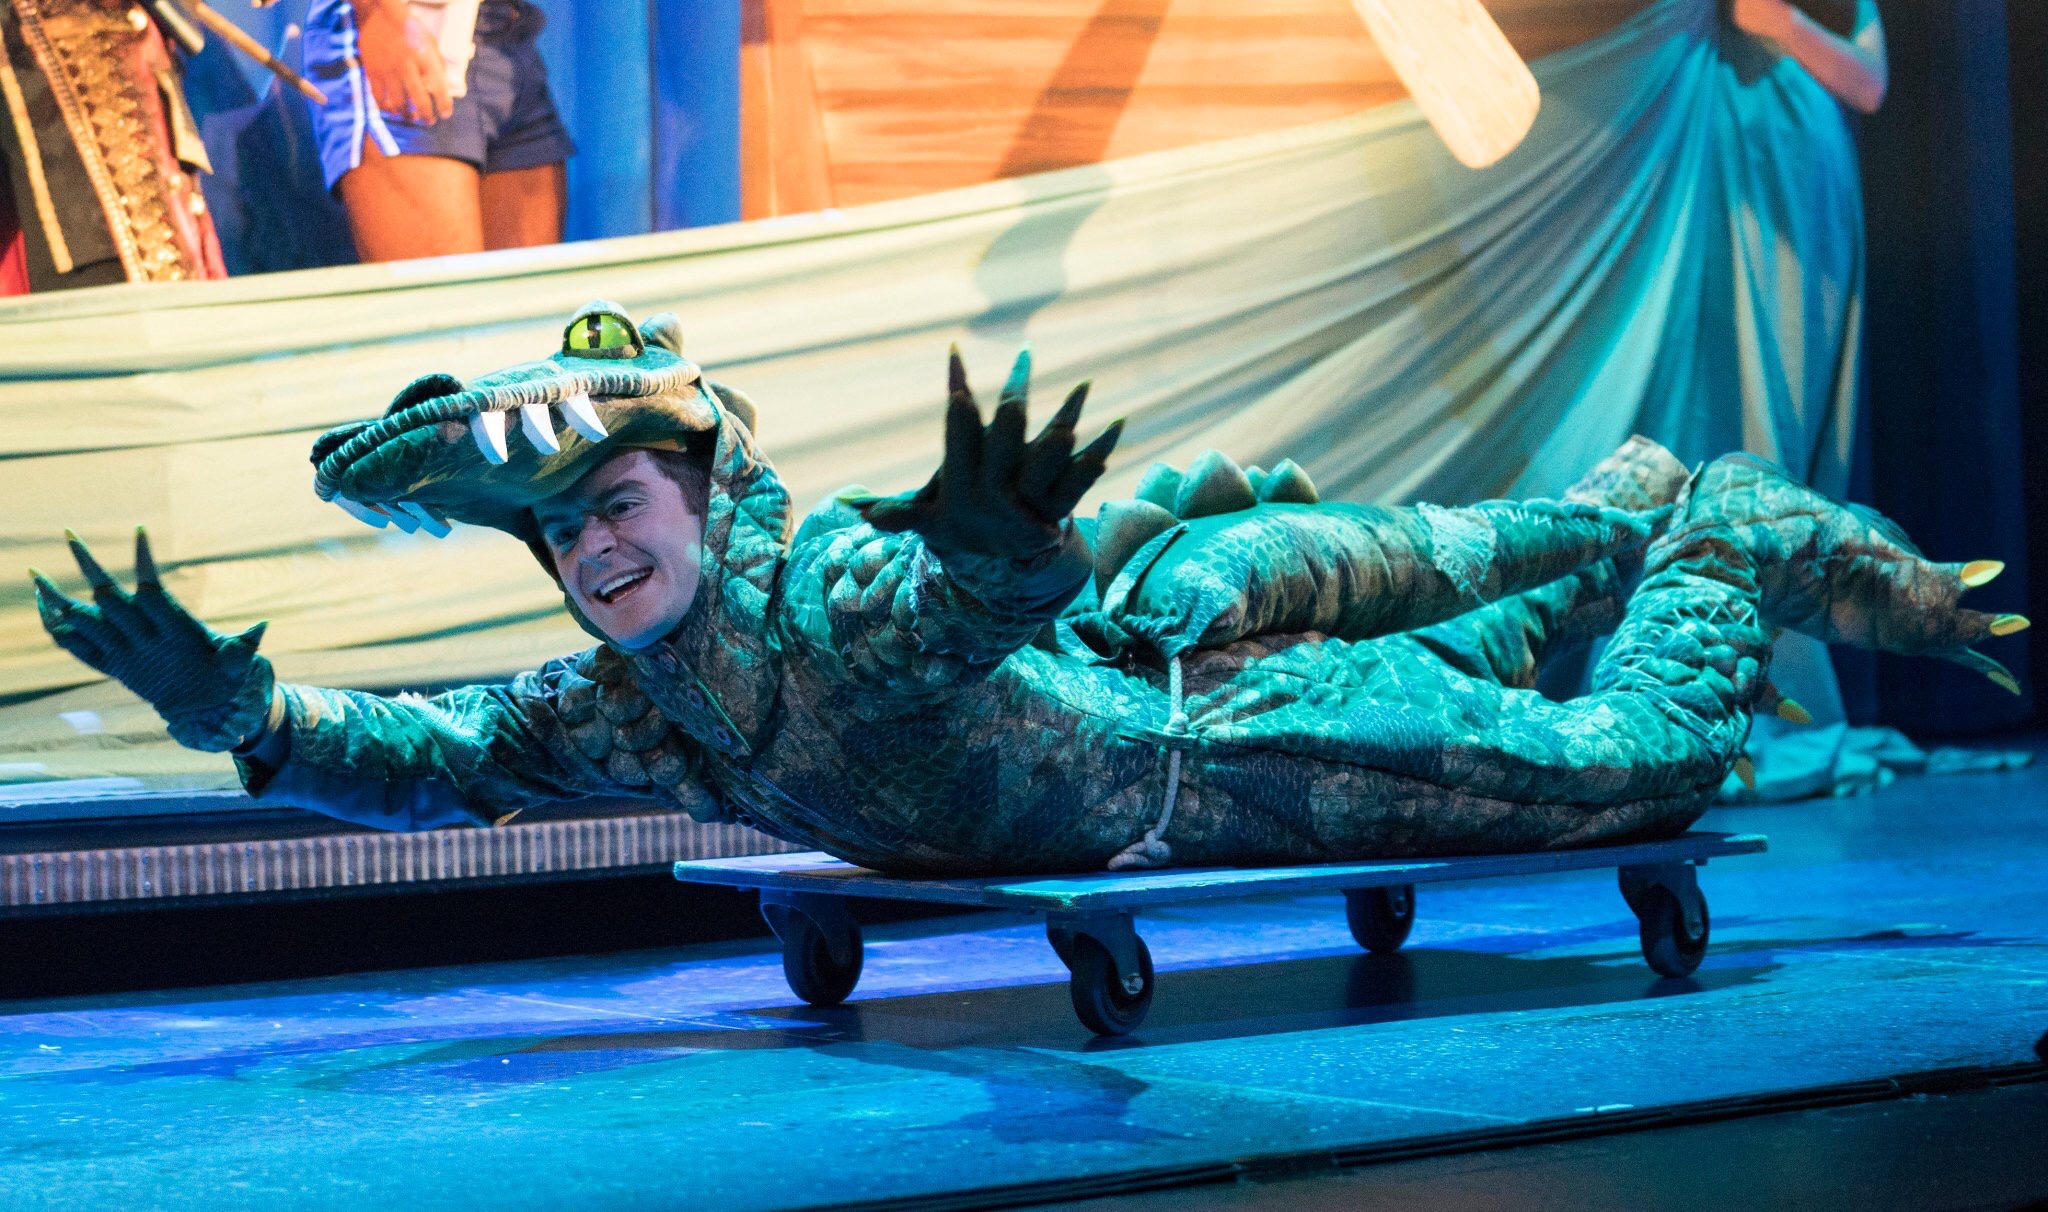 Peter Pan Goes Wrong' review: Bradley Whitford and Mischief make merry